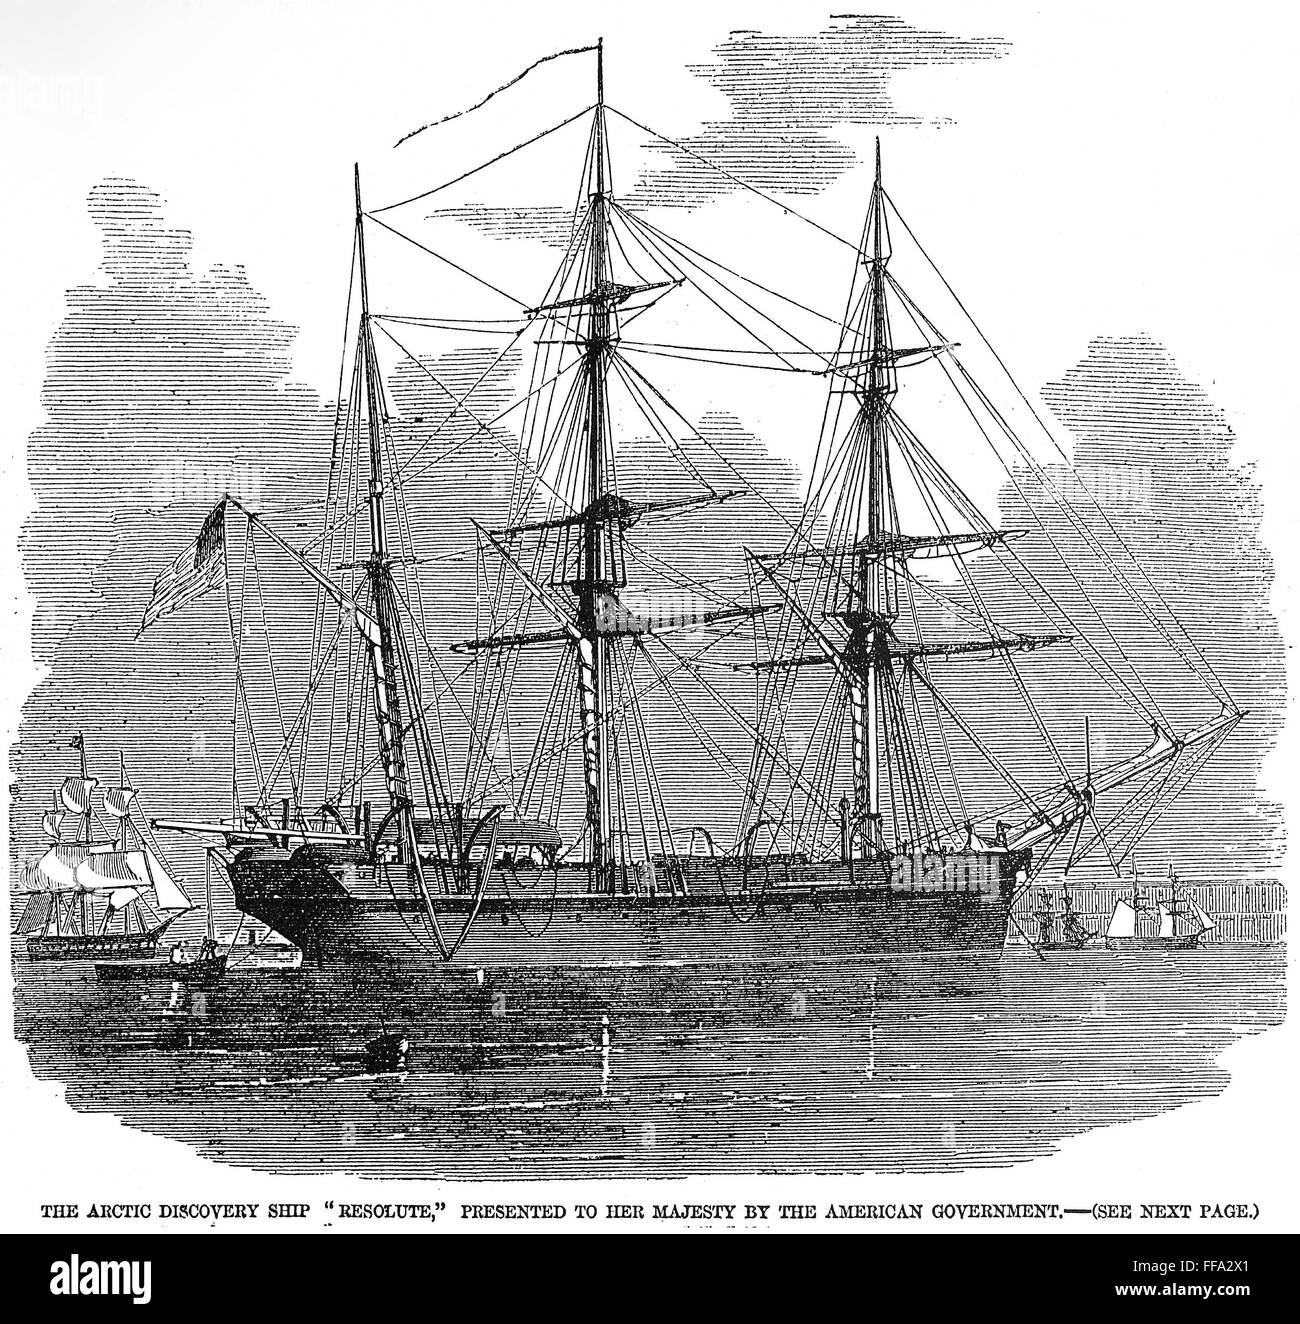 SHIPS: HMS 'RESOLUTE.' /nThe Arctic discovery ship HMS 'Resolute,' presented to Queen Victoria by the American government. Wood engraving from an English newspaper, 1856. Stock Photo